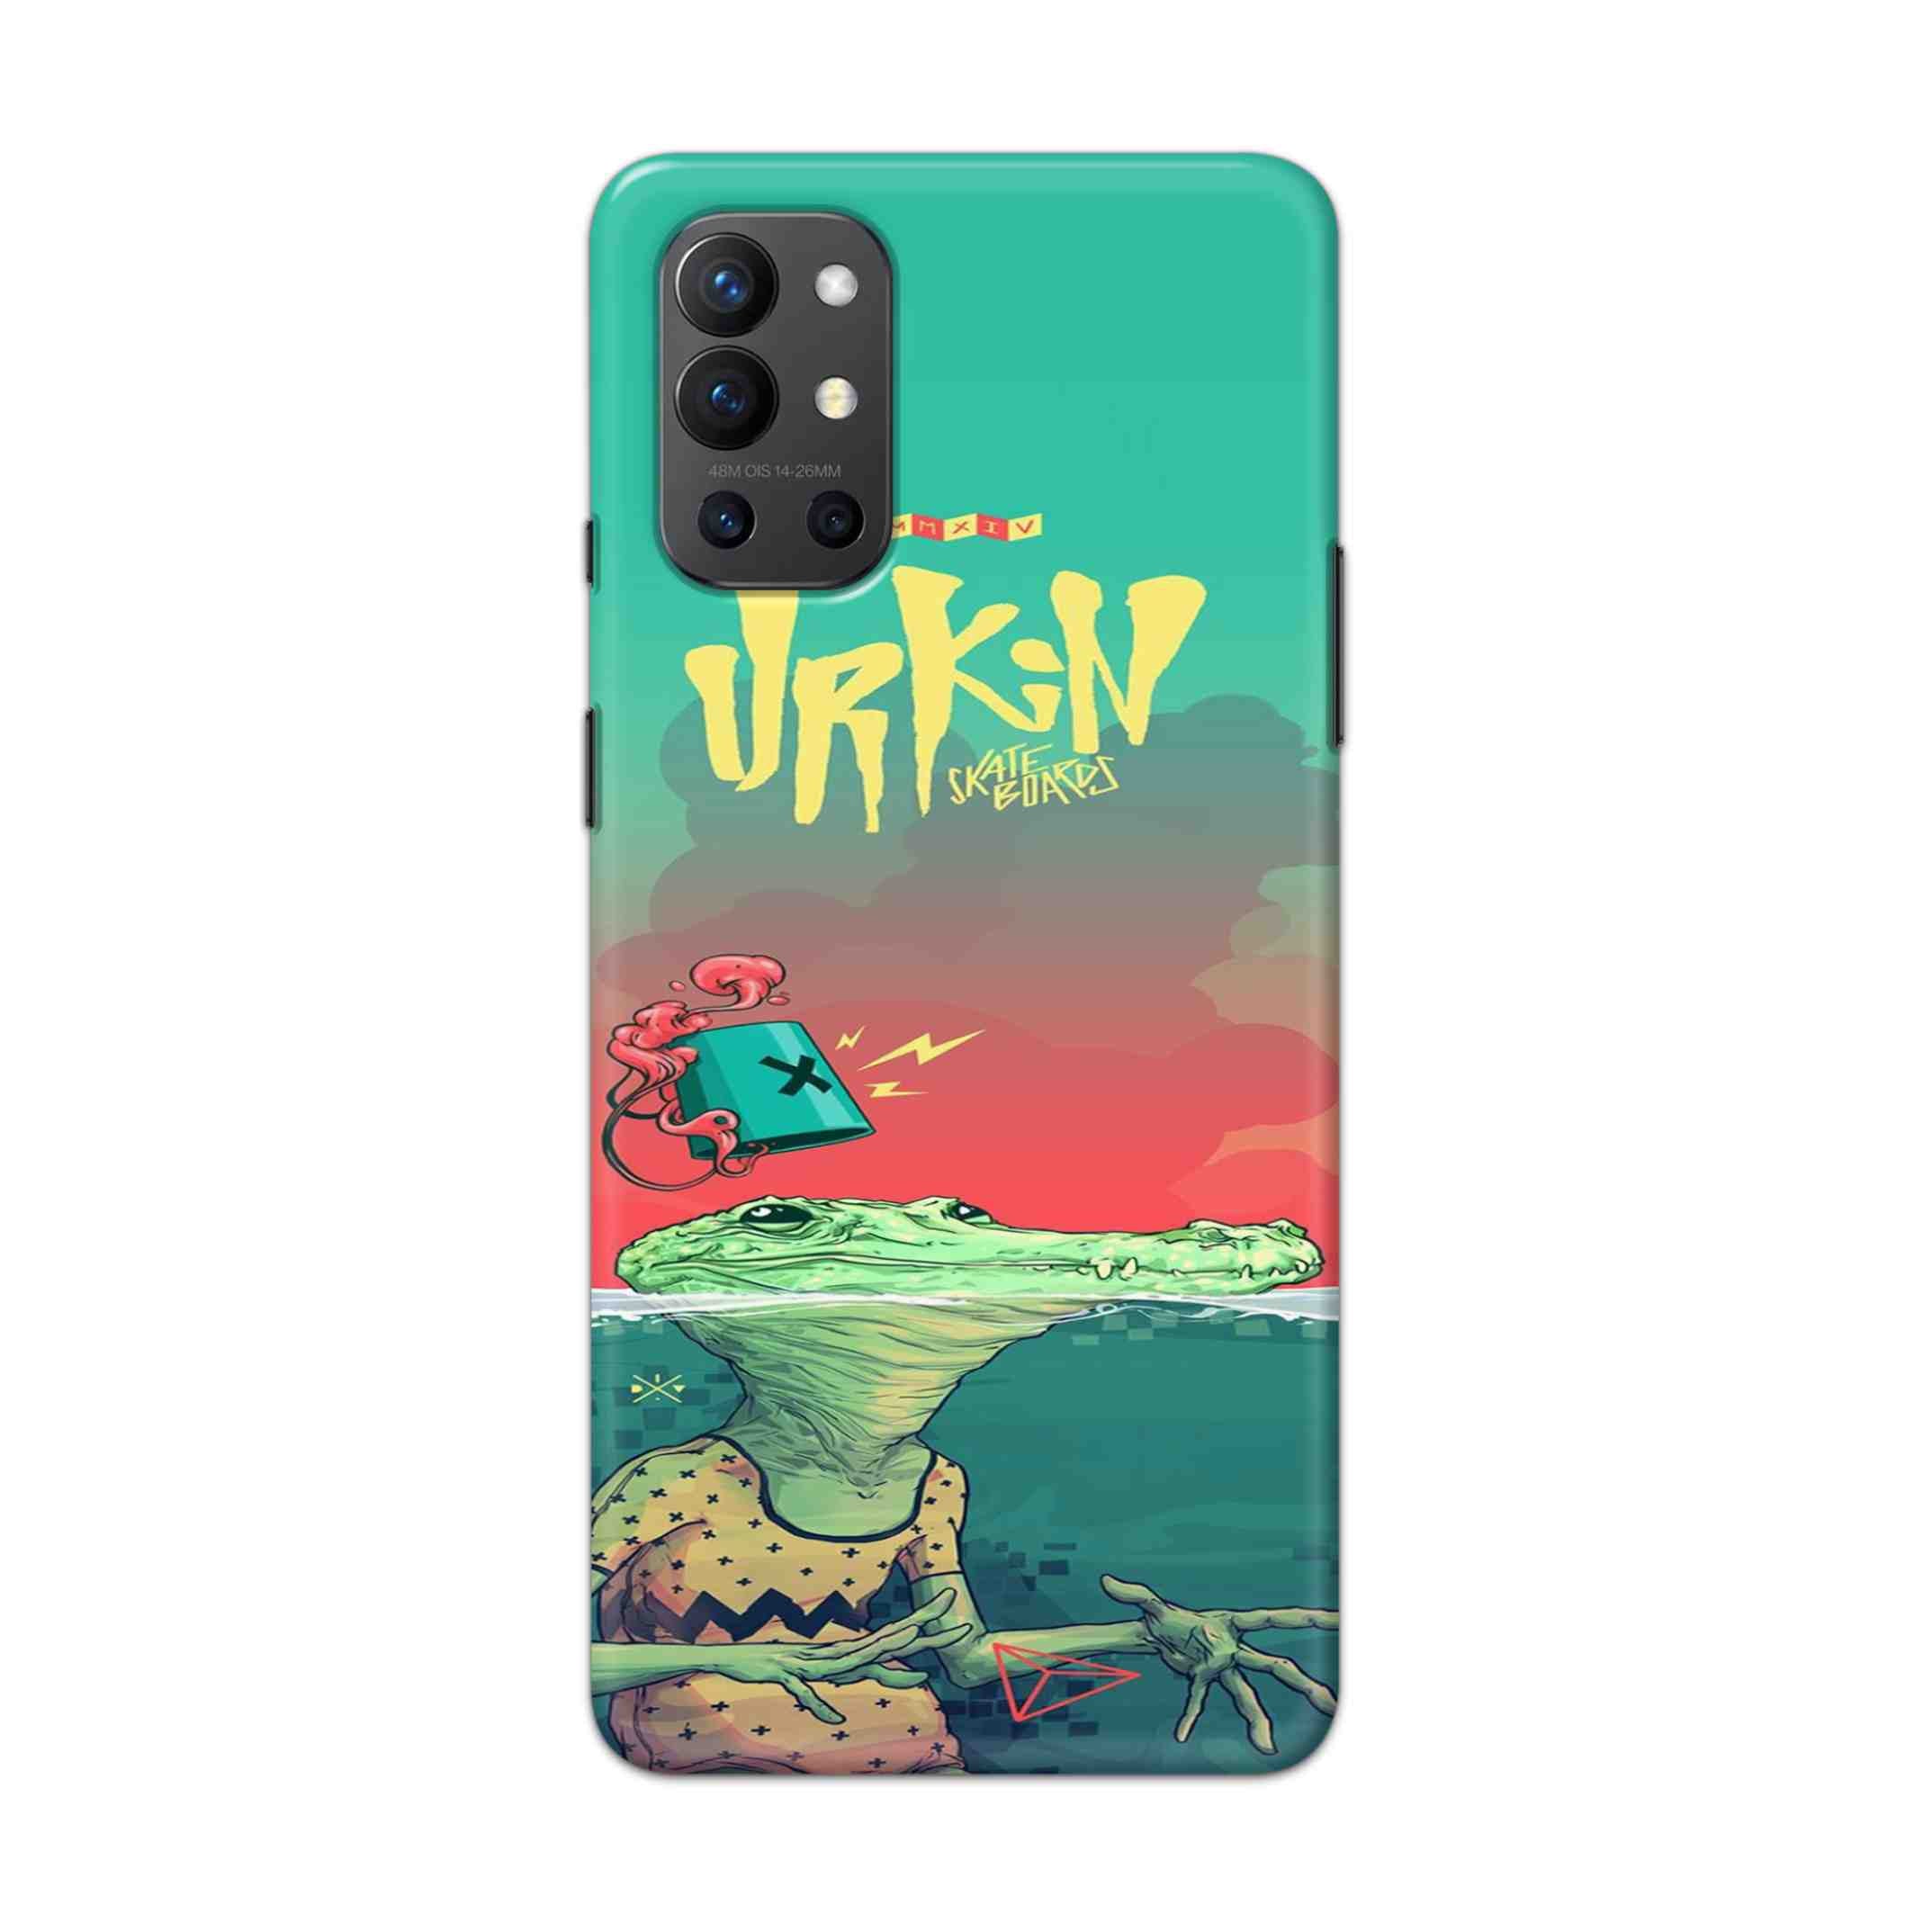 Buy Urkin Hard Back Mobile Phone Case Cover For OnePlus 9R / 8T Online